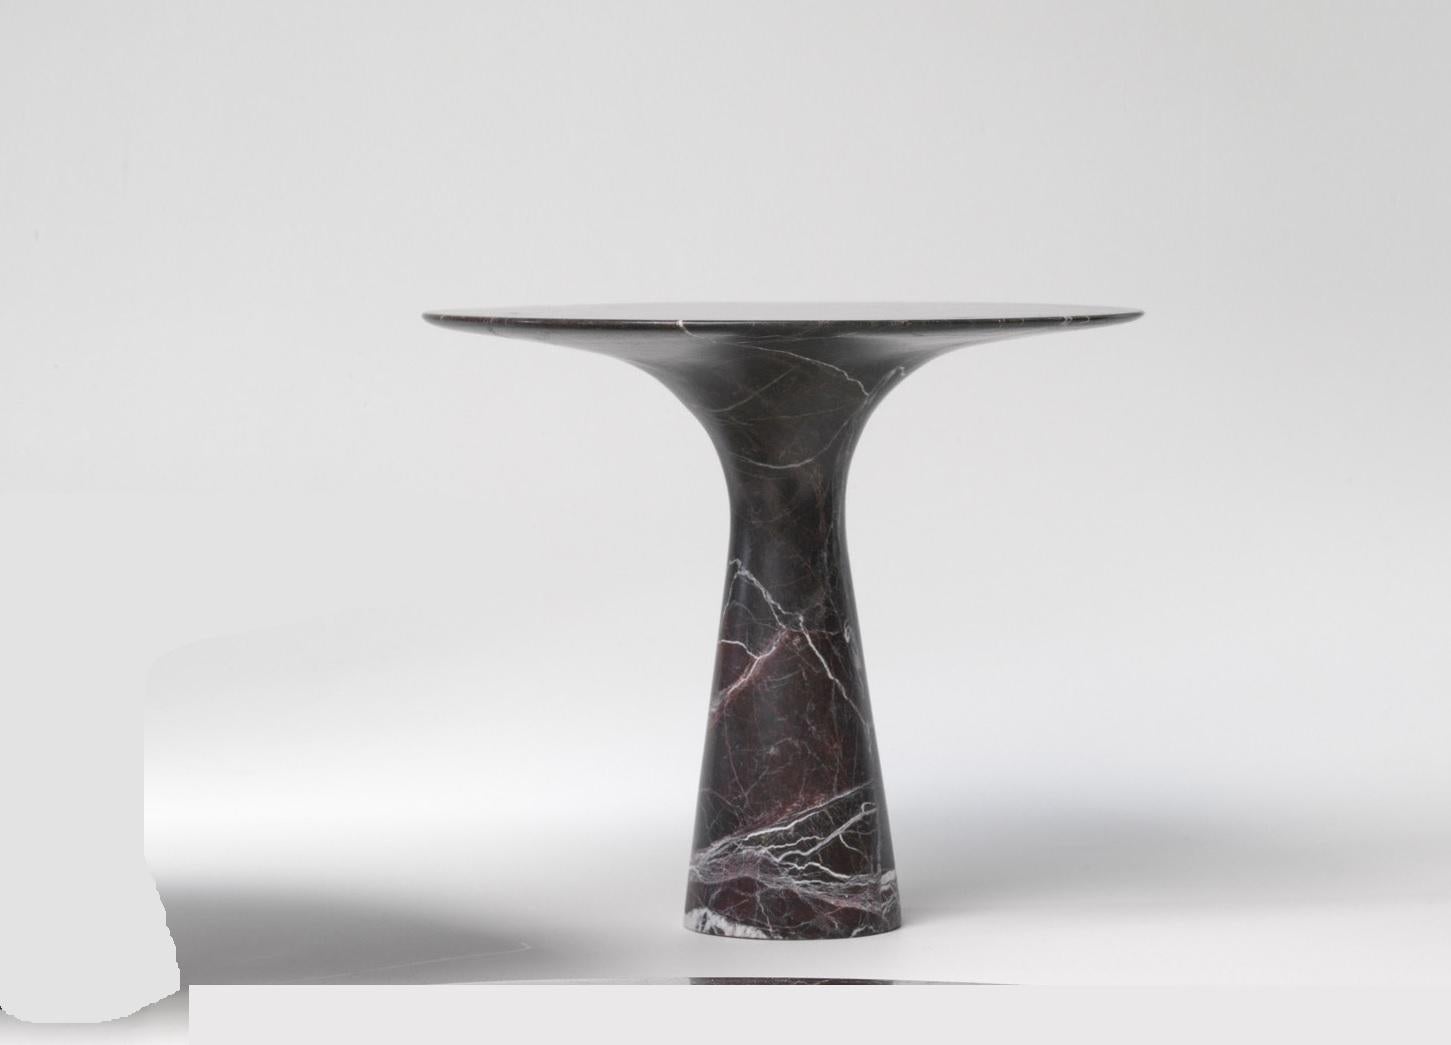 Pair of Refined Contemporary Marble 03 Rosso Lepanto Marble Cake Stand
Signed by Leo Aerts.
Dimensions: Diameter 26 x Height 22.5 cm 
Material: Rosso Levanto Marble
Technique: Polished, Carved. 
Available in Marble: Kyknos, Bianco Statuarietto,